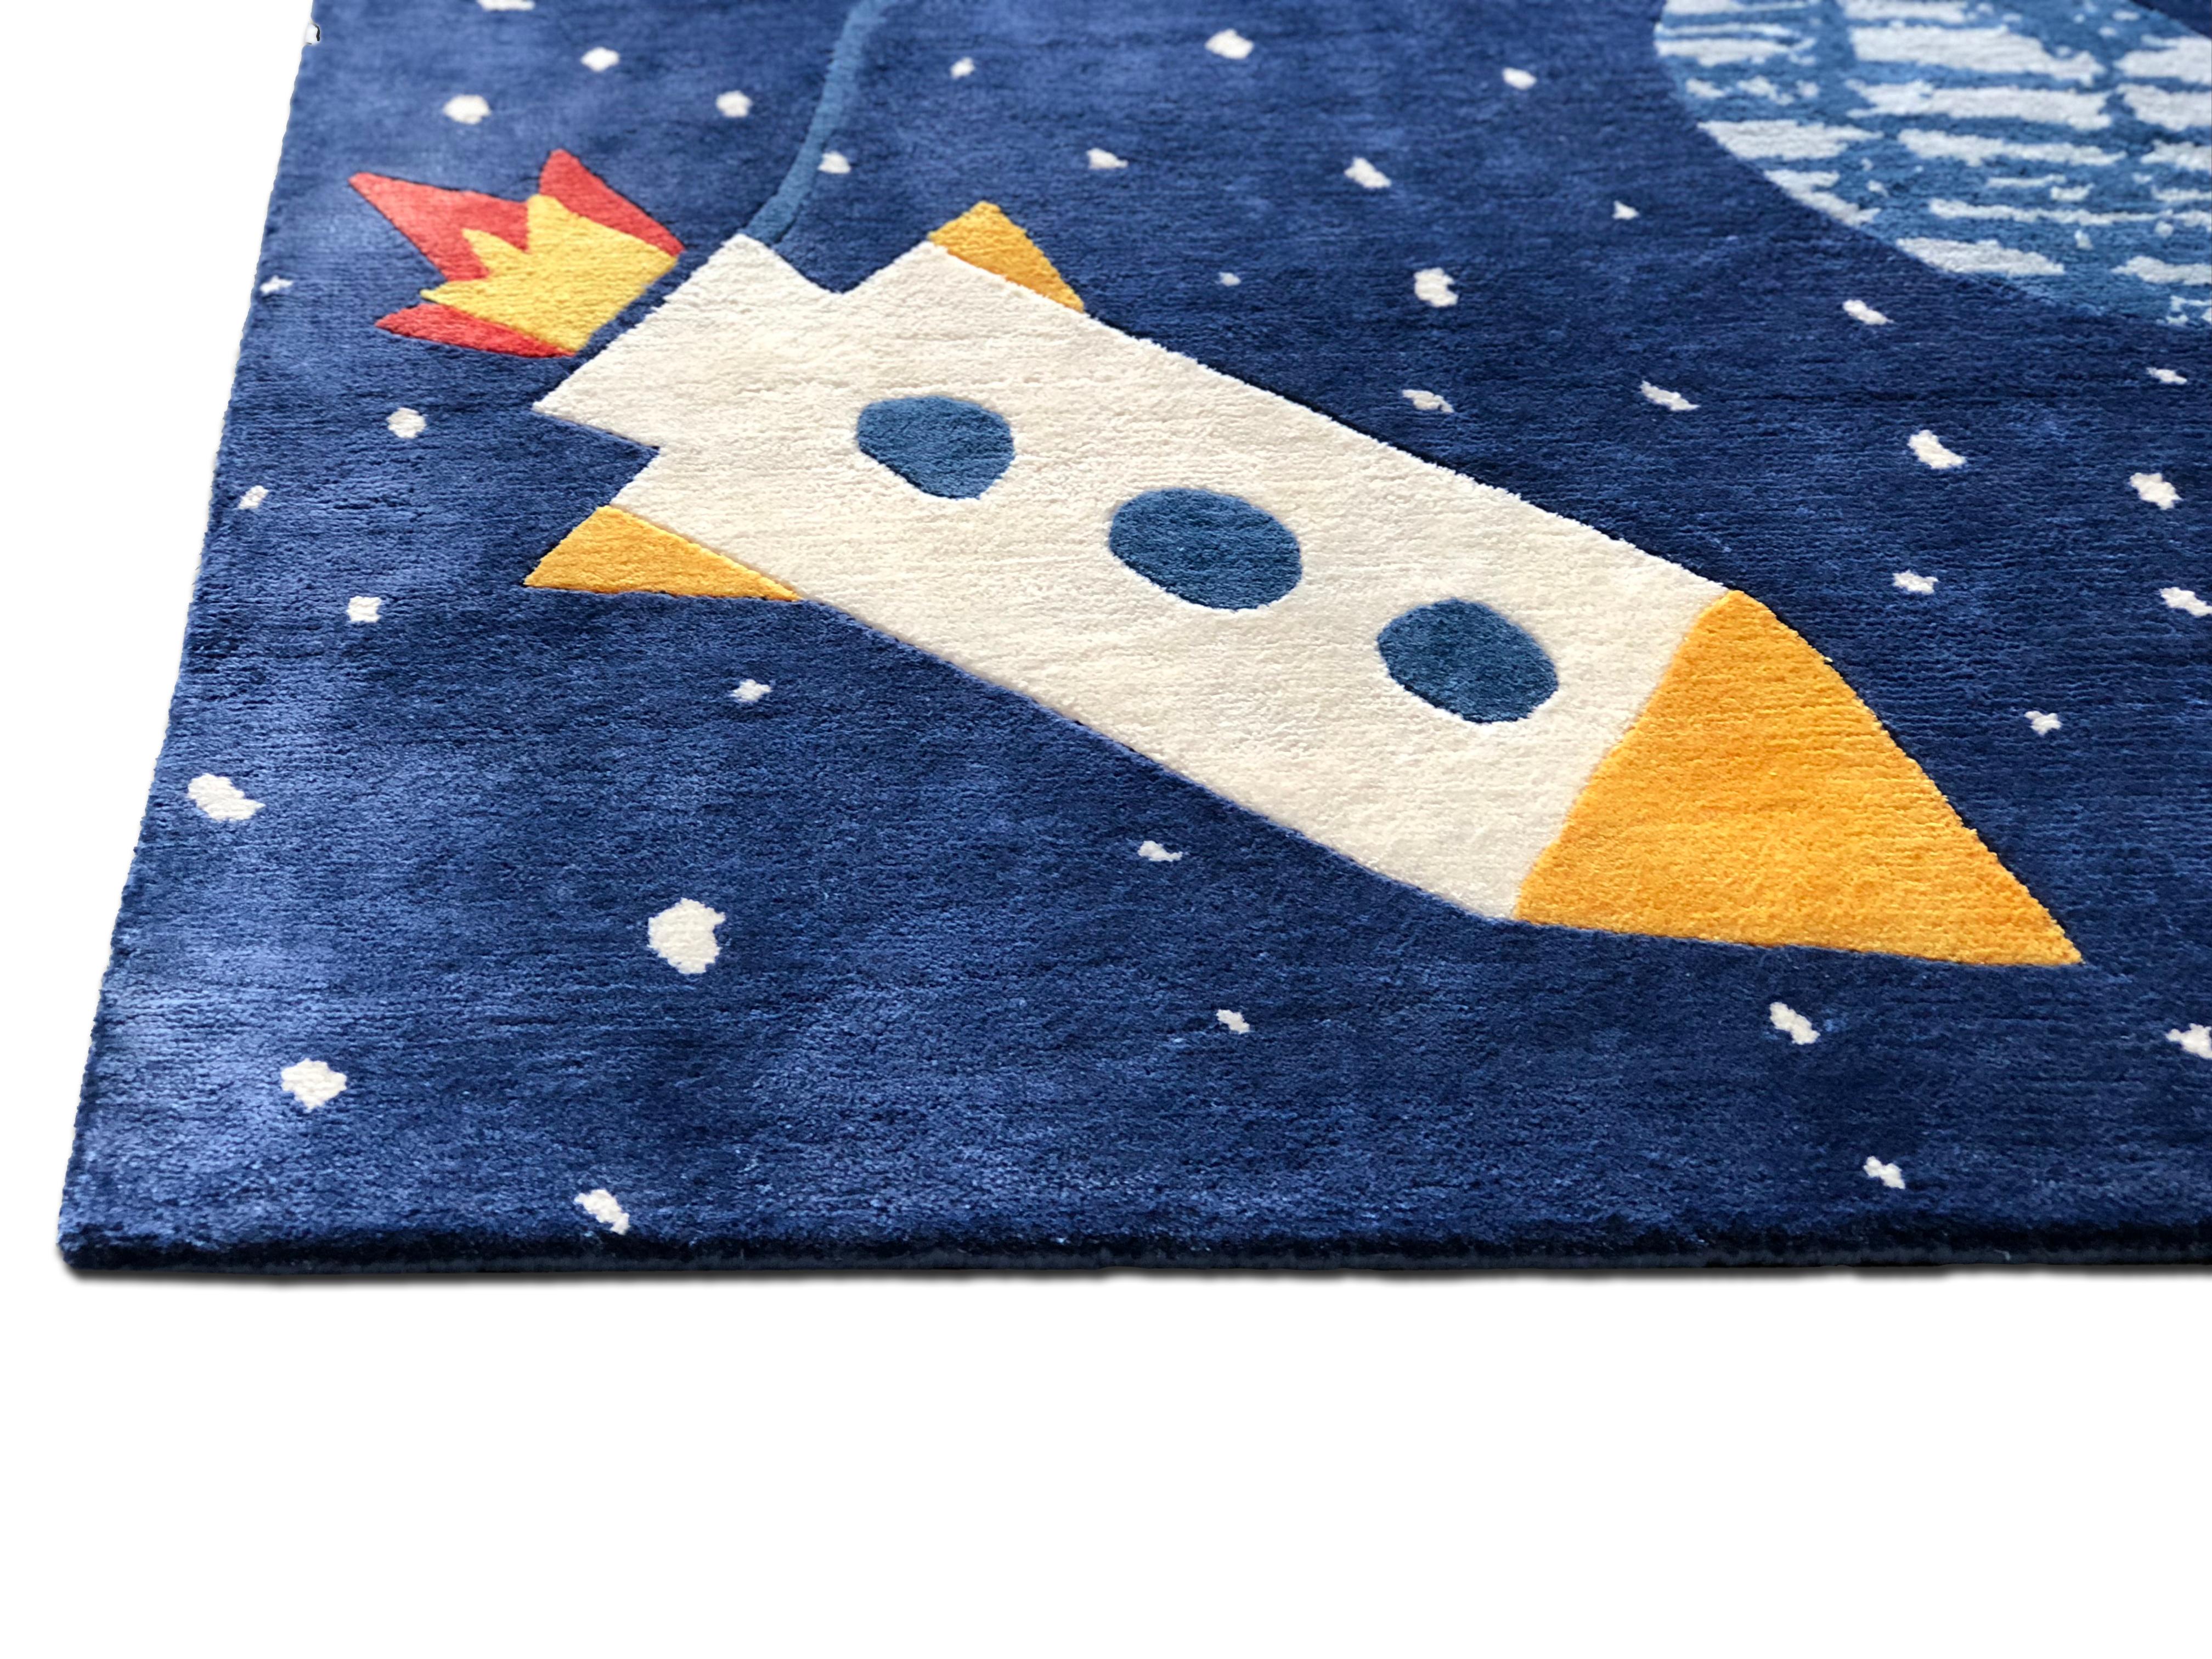 Hand-Knotted Space Ace Rug by Daria Solak, Hand Knotted, 100% New Zealand Wool Size 100x125cm For Sale